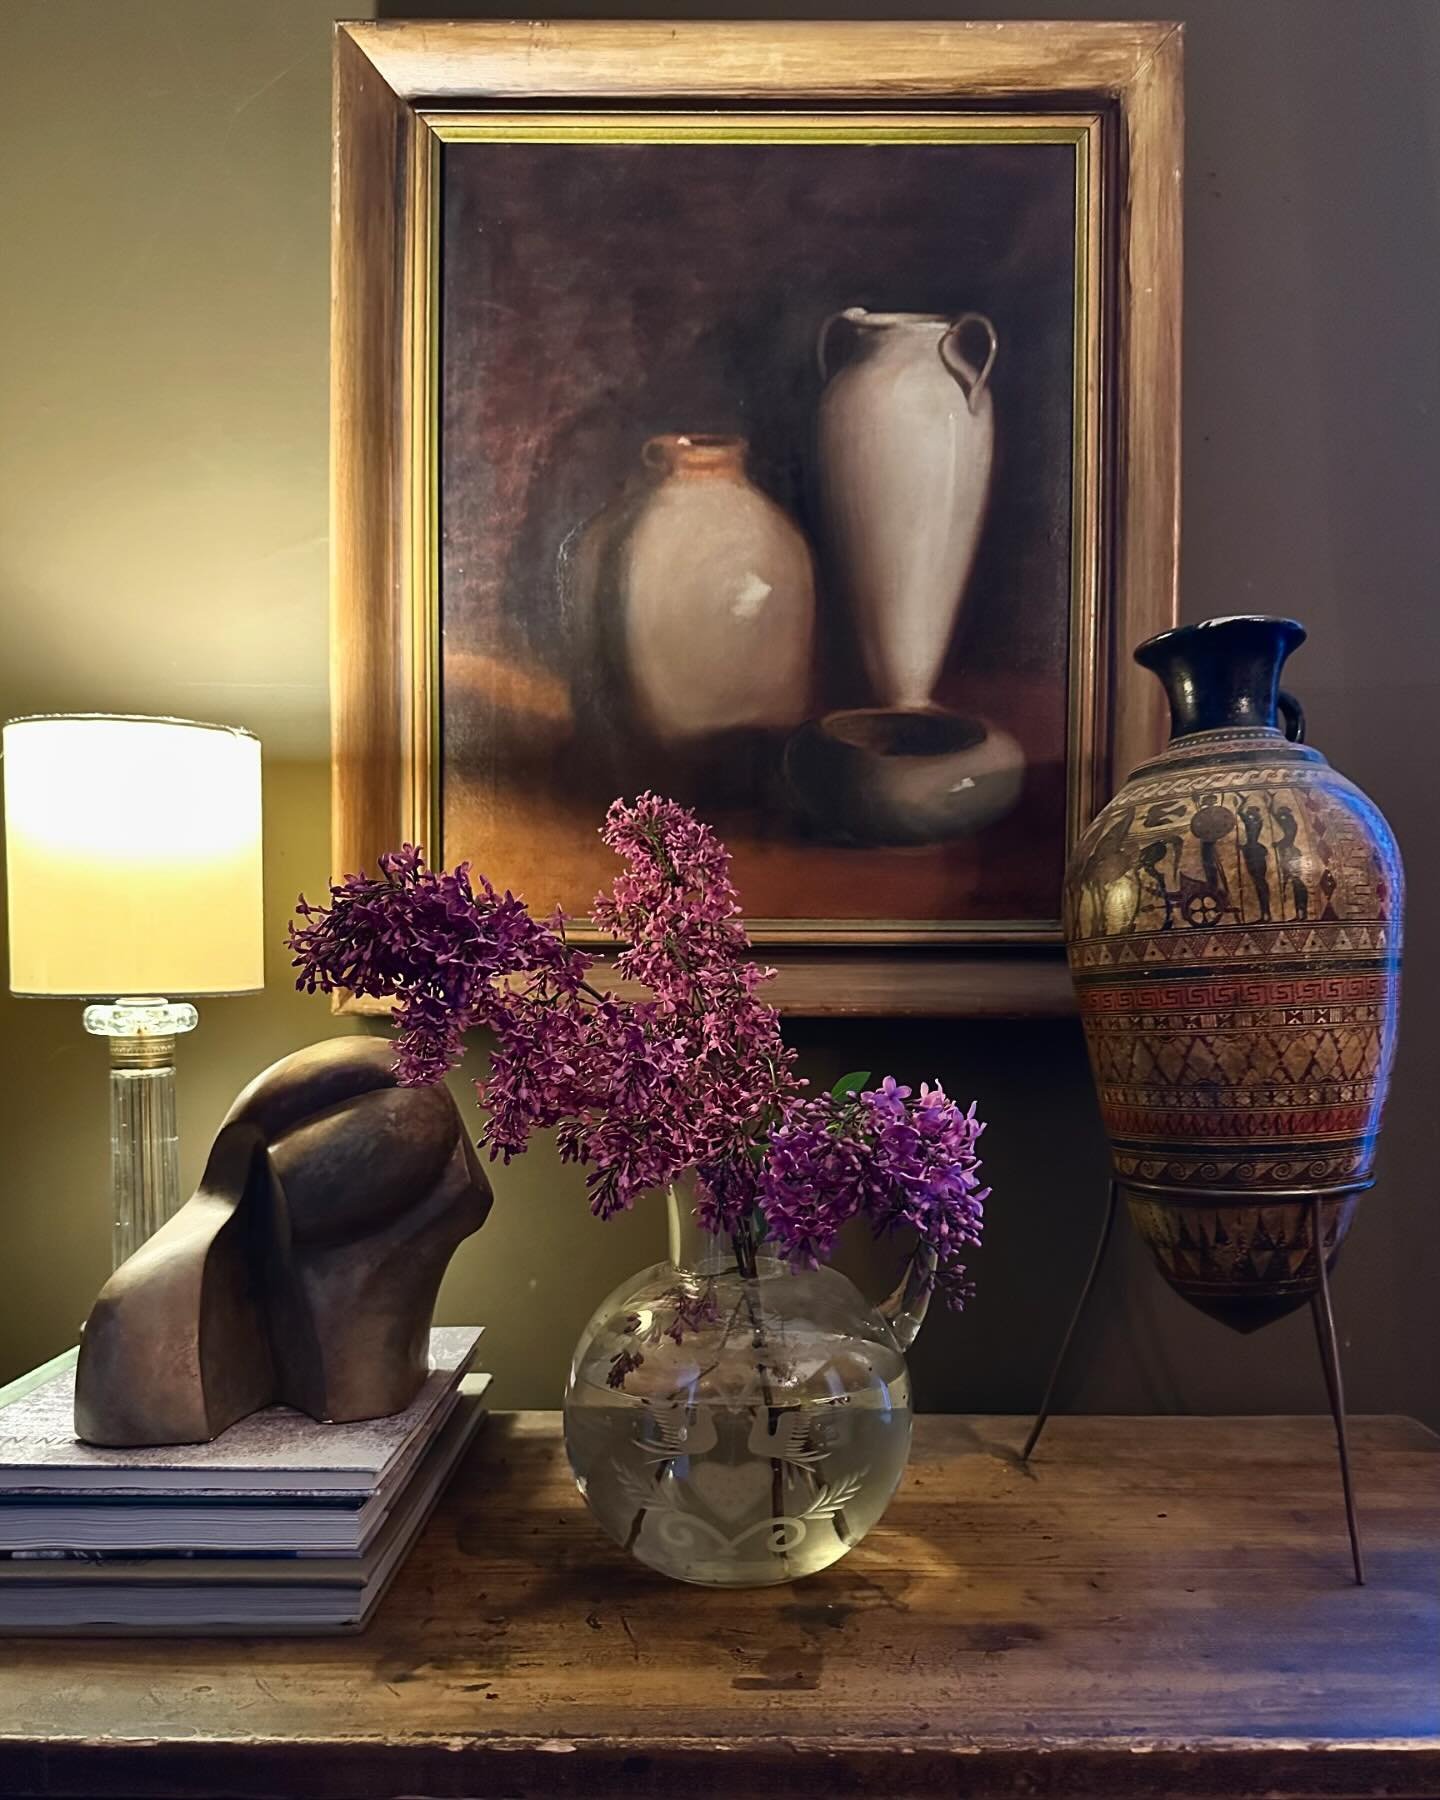 Rejoice, the lilacs are here! #lancethouse #thelilactime #vintageart